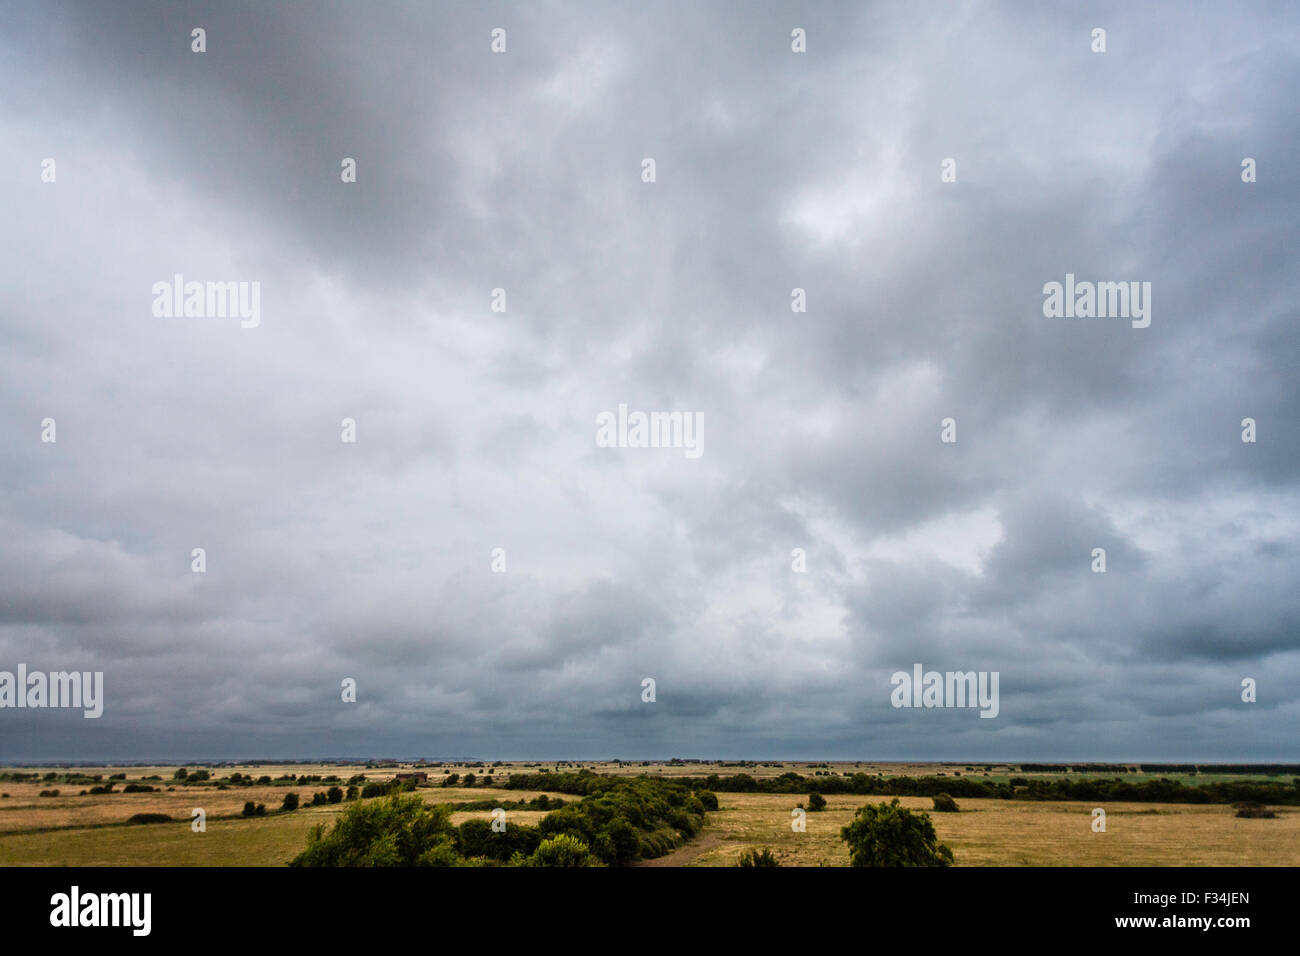 The lowland between Deal and Sandwich seen from vantage point at betteshanger park. Horizon very low in the frame with dark storm clouds overhead. Stock Photo